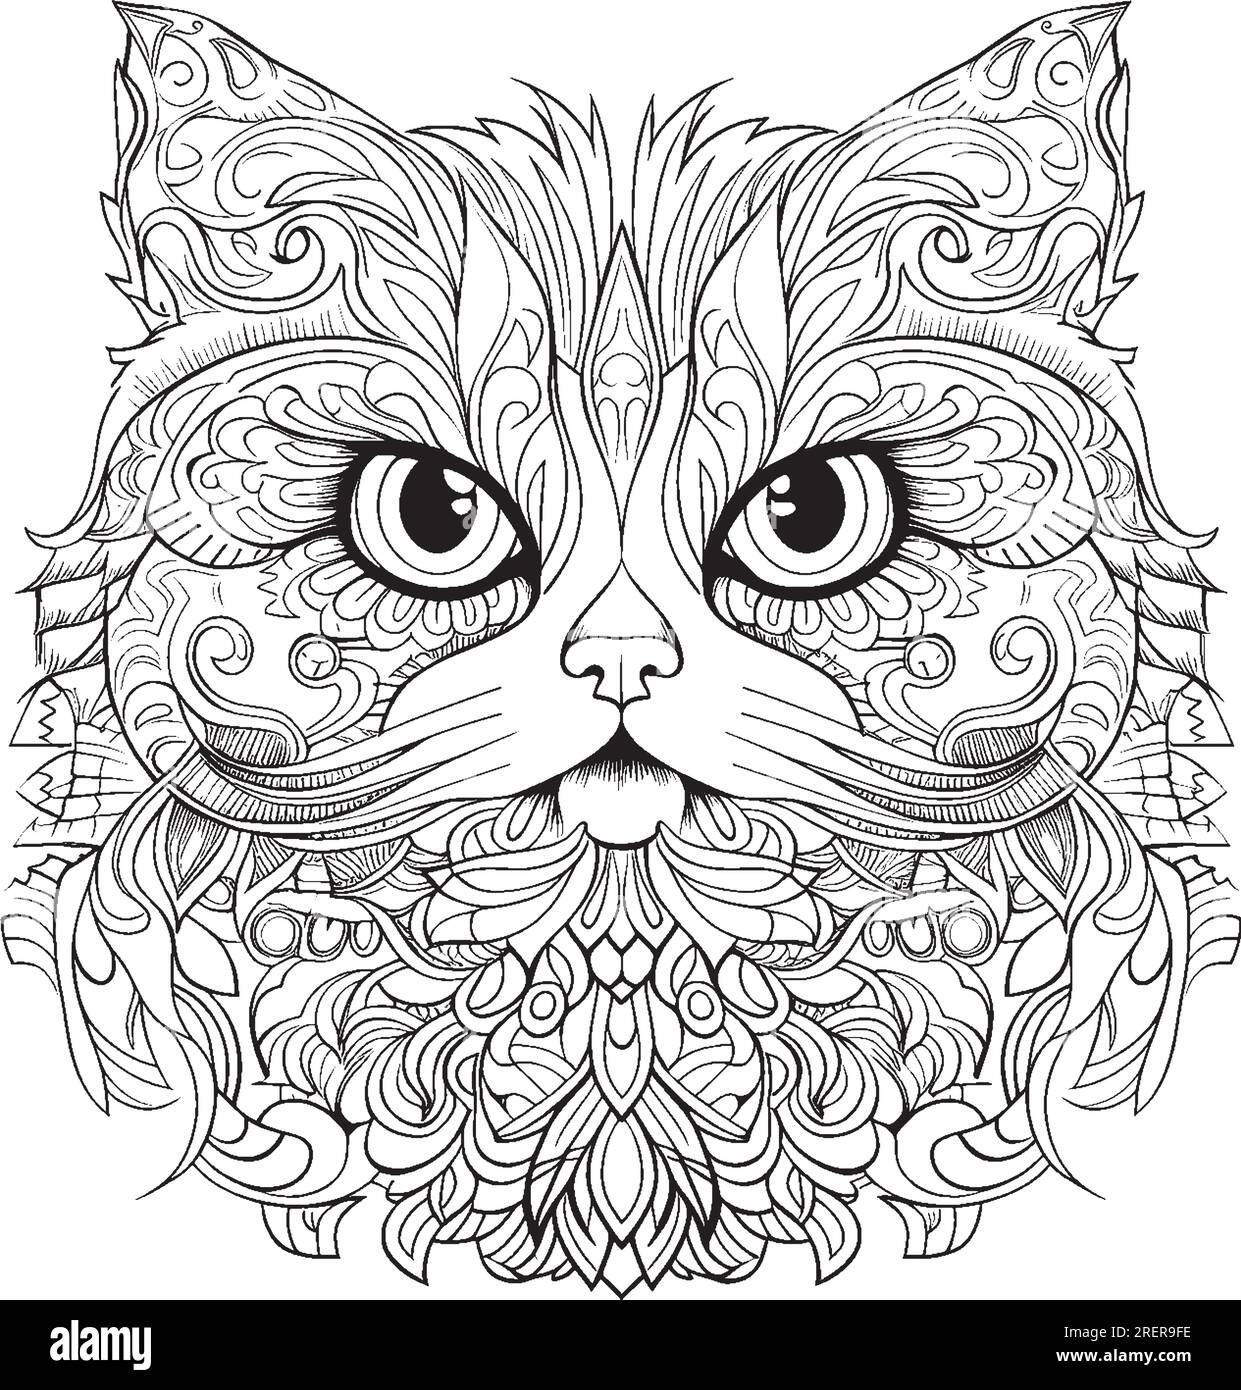 https://c8.alamy.com/comp/2RER9FE/mandala-coloring-pages-for-kids-and-adults-2RER9FE.jpg